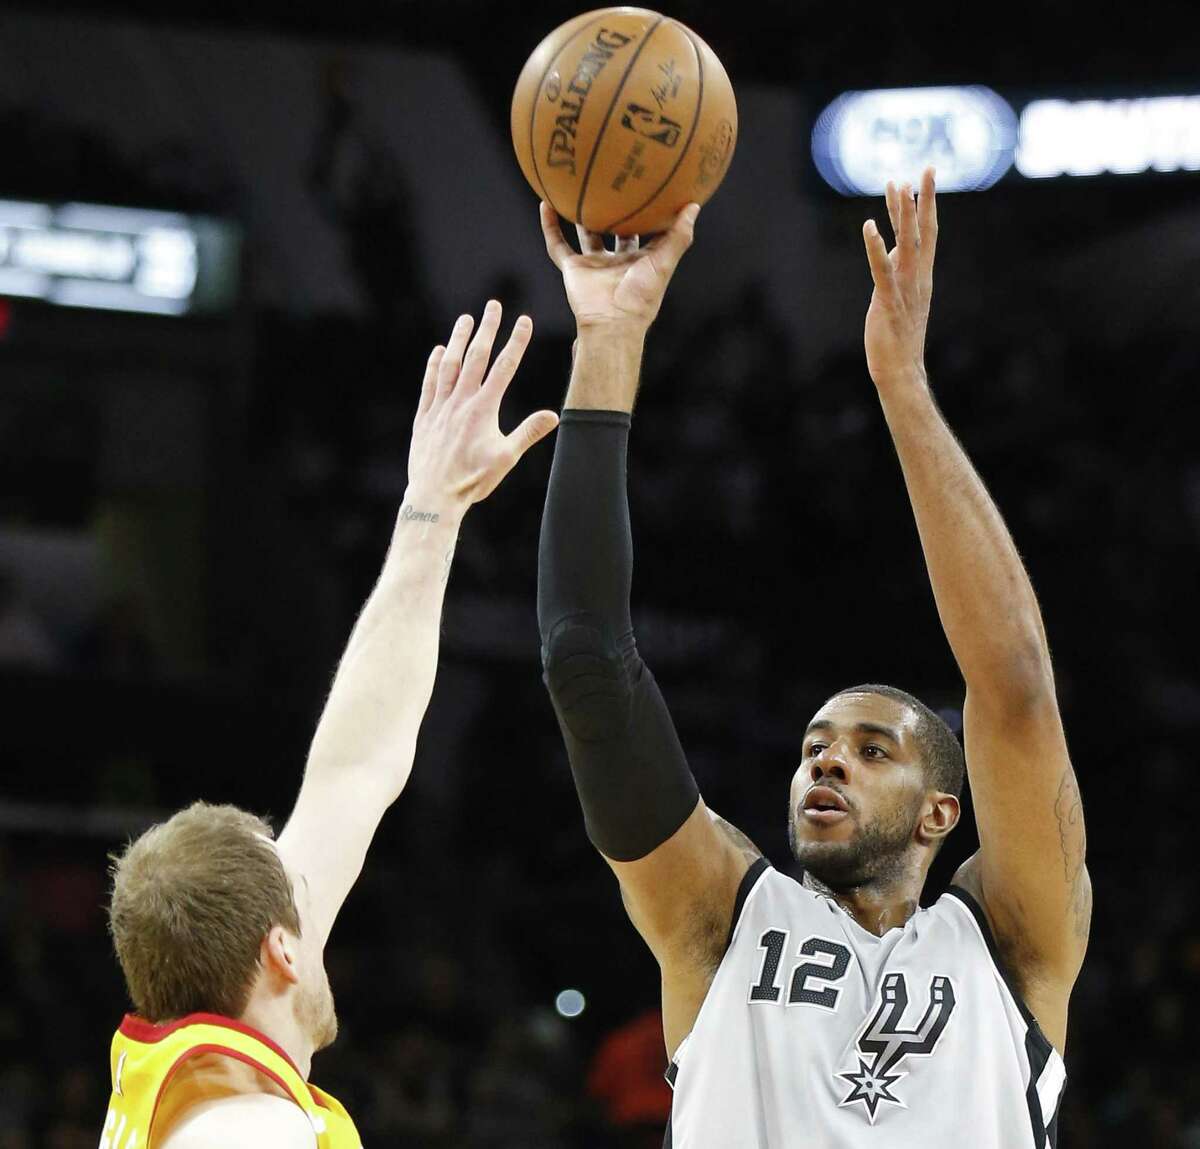 San Antonio Spurs' LaMarcus Aldridge shoots a 3-pointer over Utah Jazz's Joe Ingles during first half action Friday March 23, 2018 at the AT&T Center.